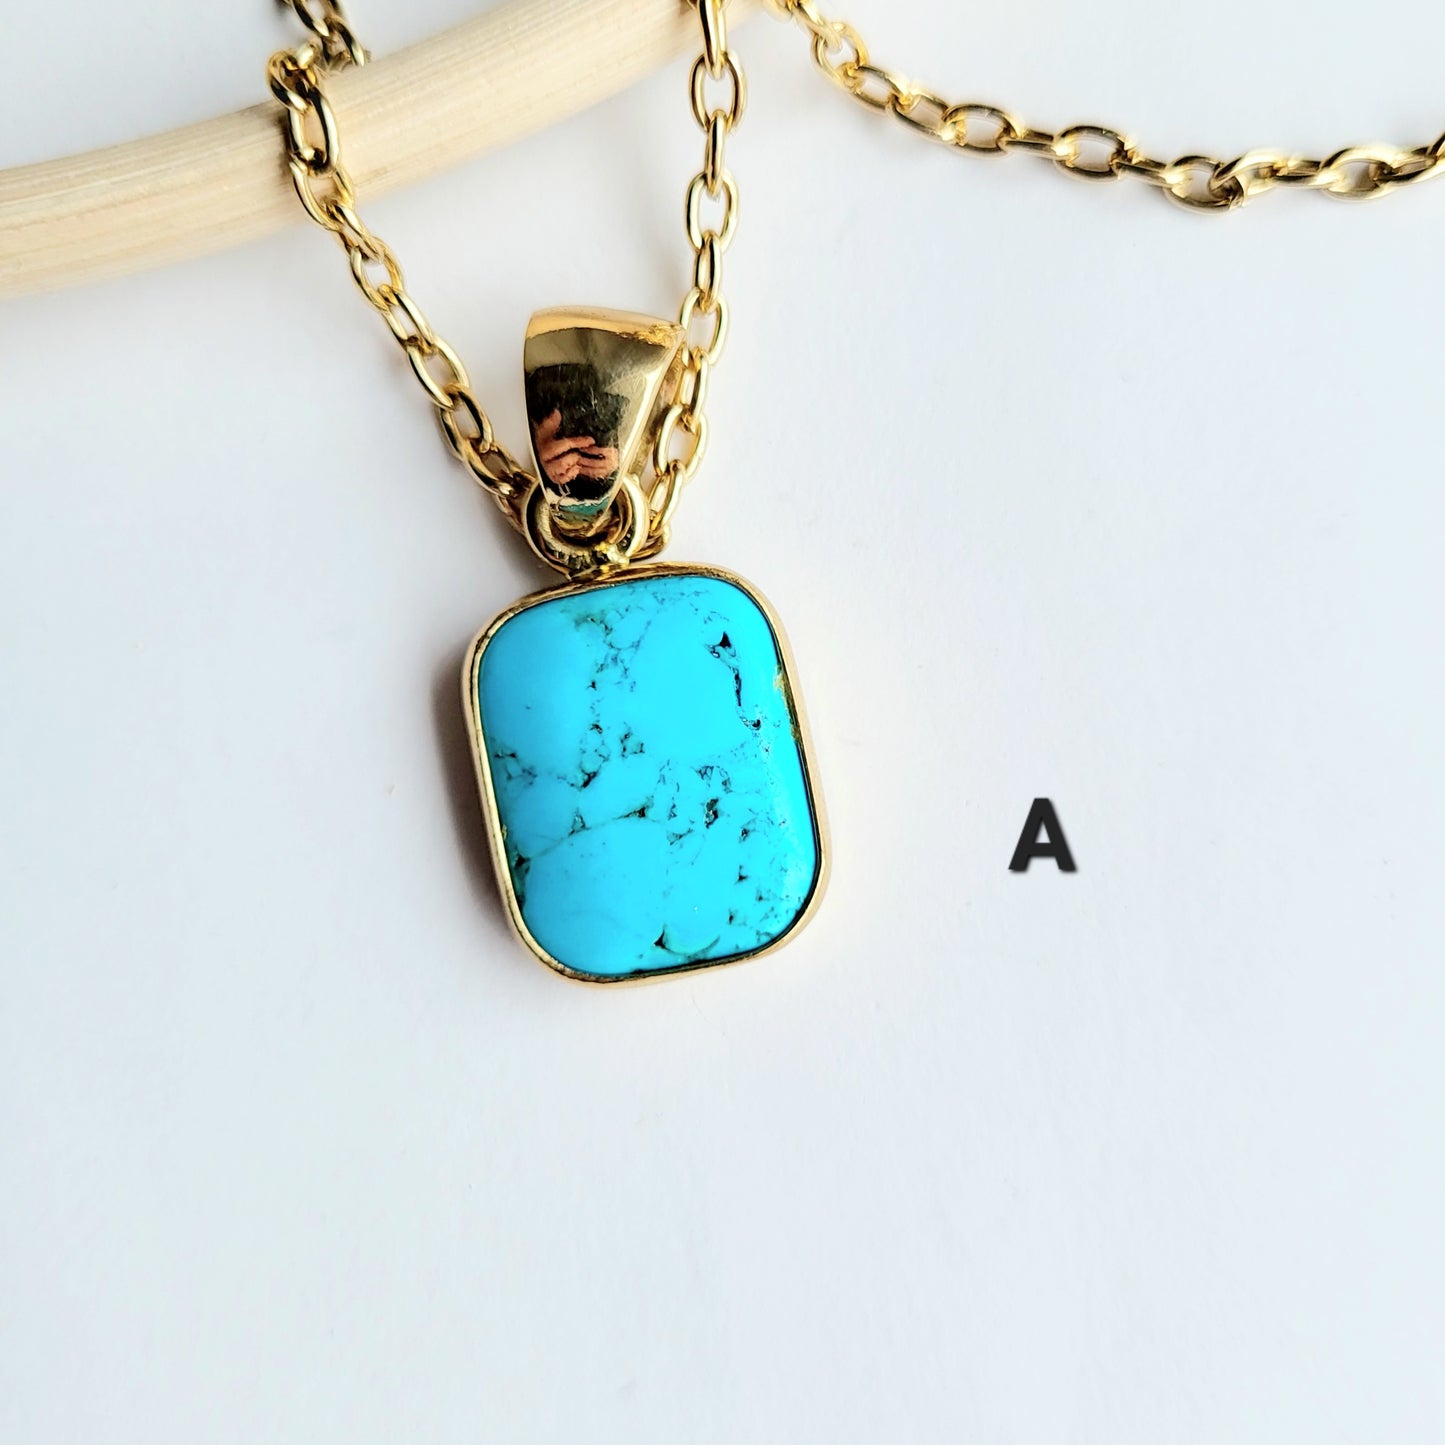 Load image into Gallery viewer, Blue Howlite Square Pendant - Alchemia
